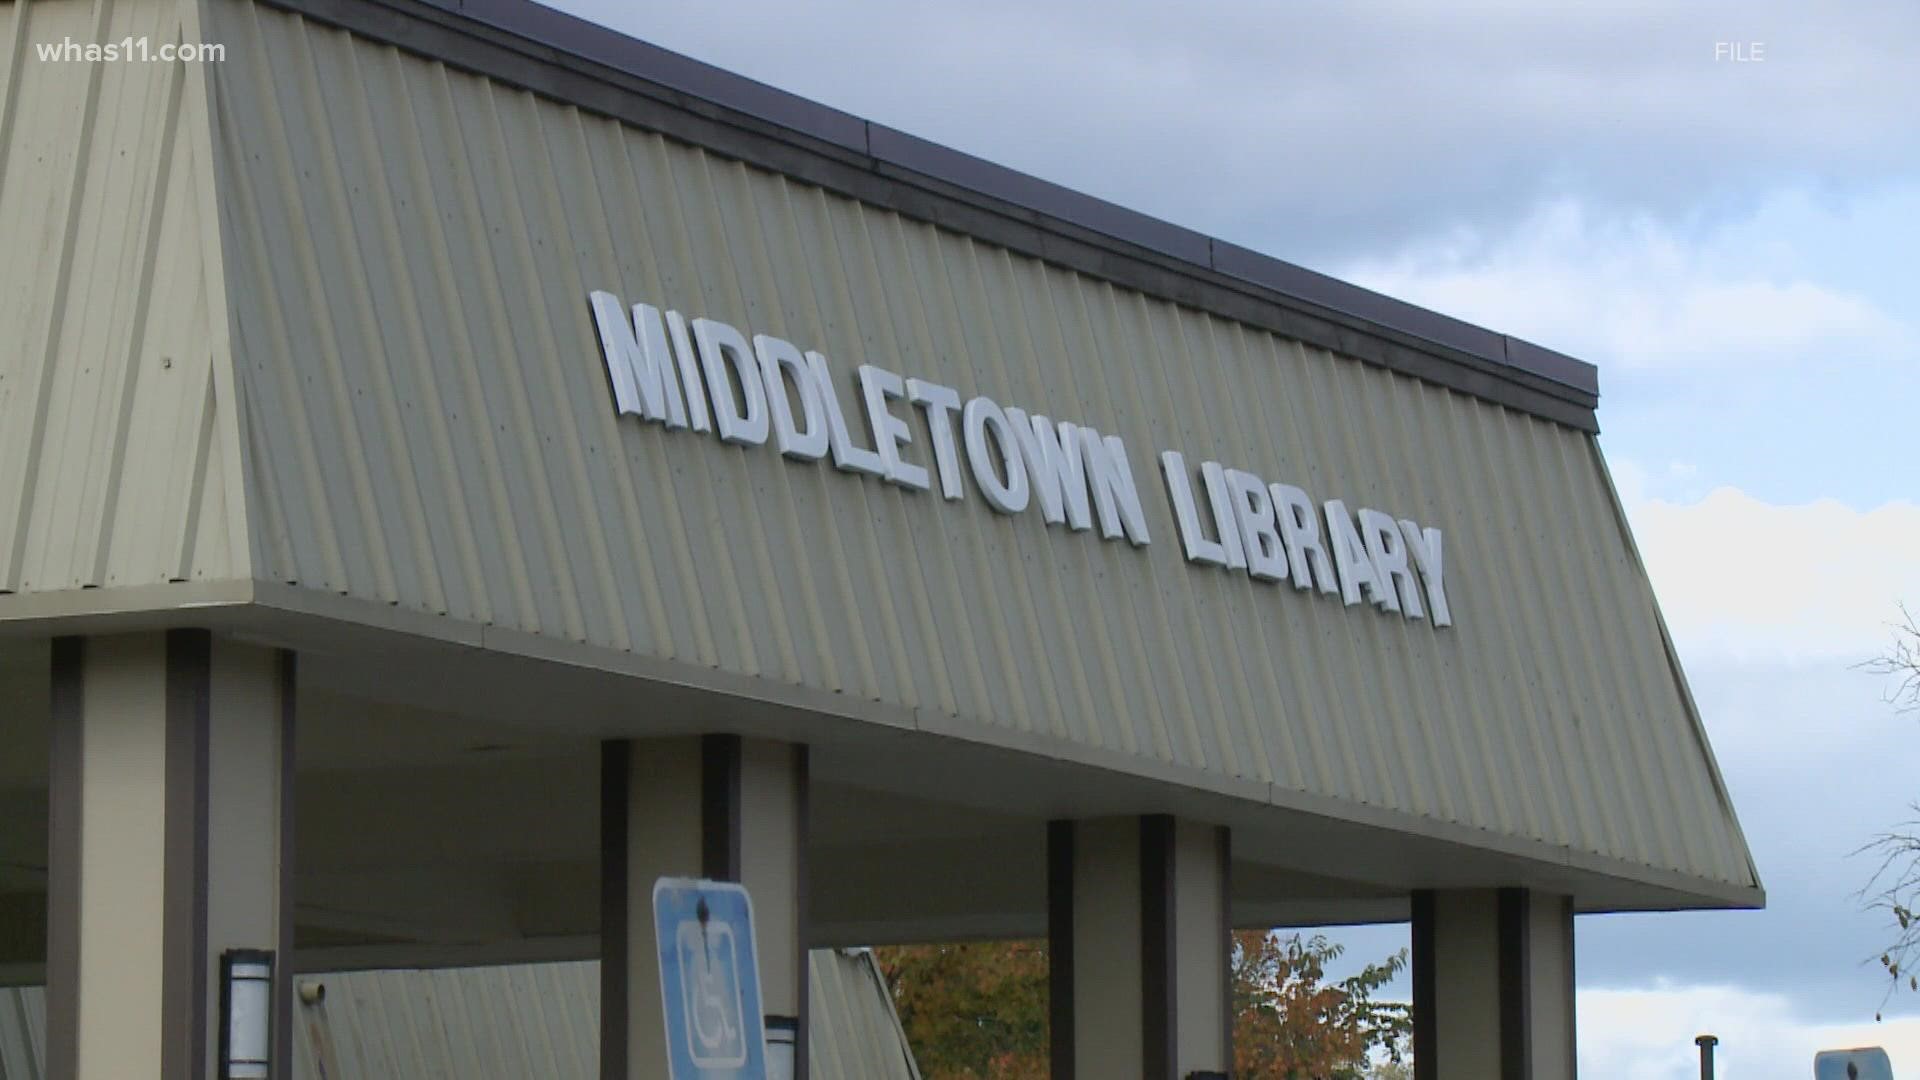 The building's lease agreement between Louisville Metro and City of Middletown leaders allows the library to use the building rent-free.